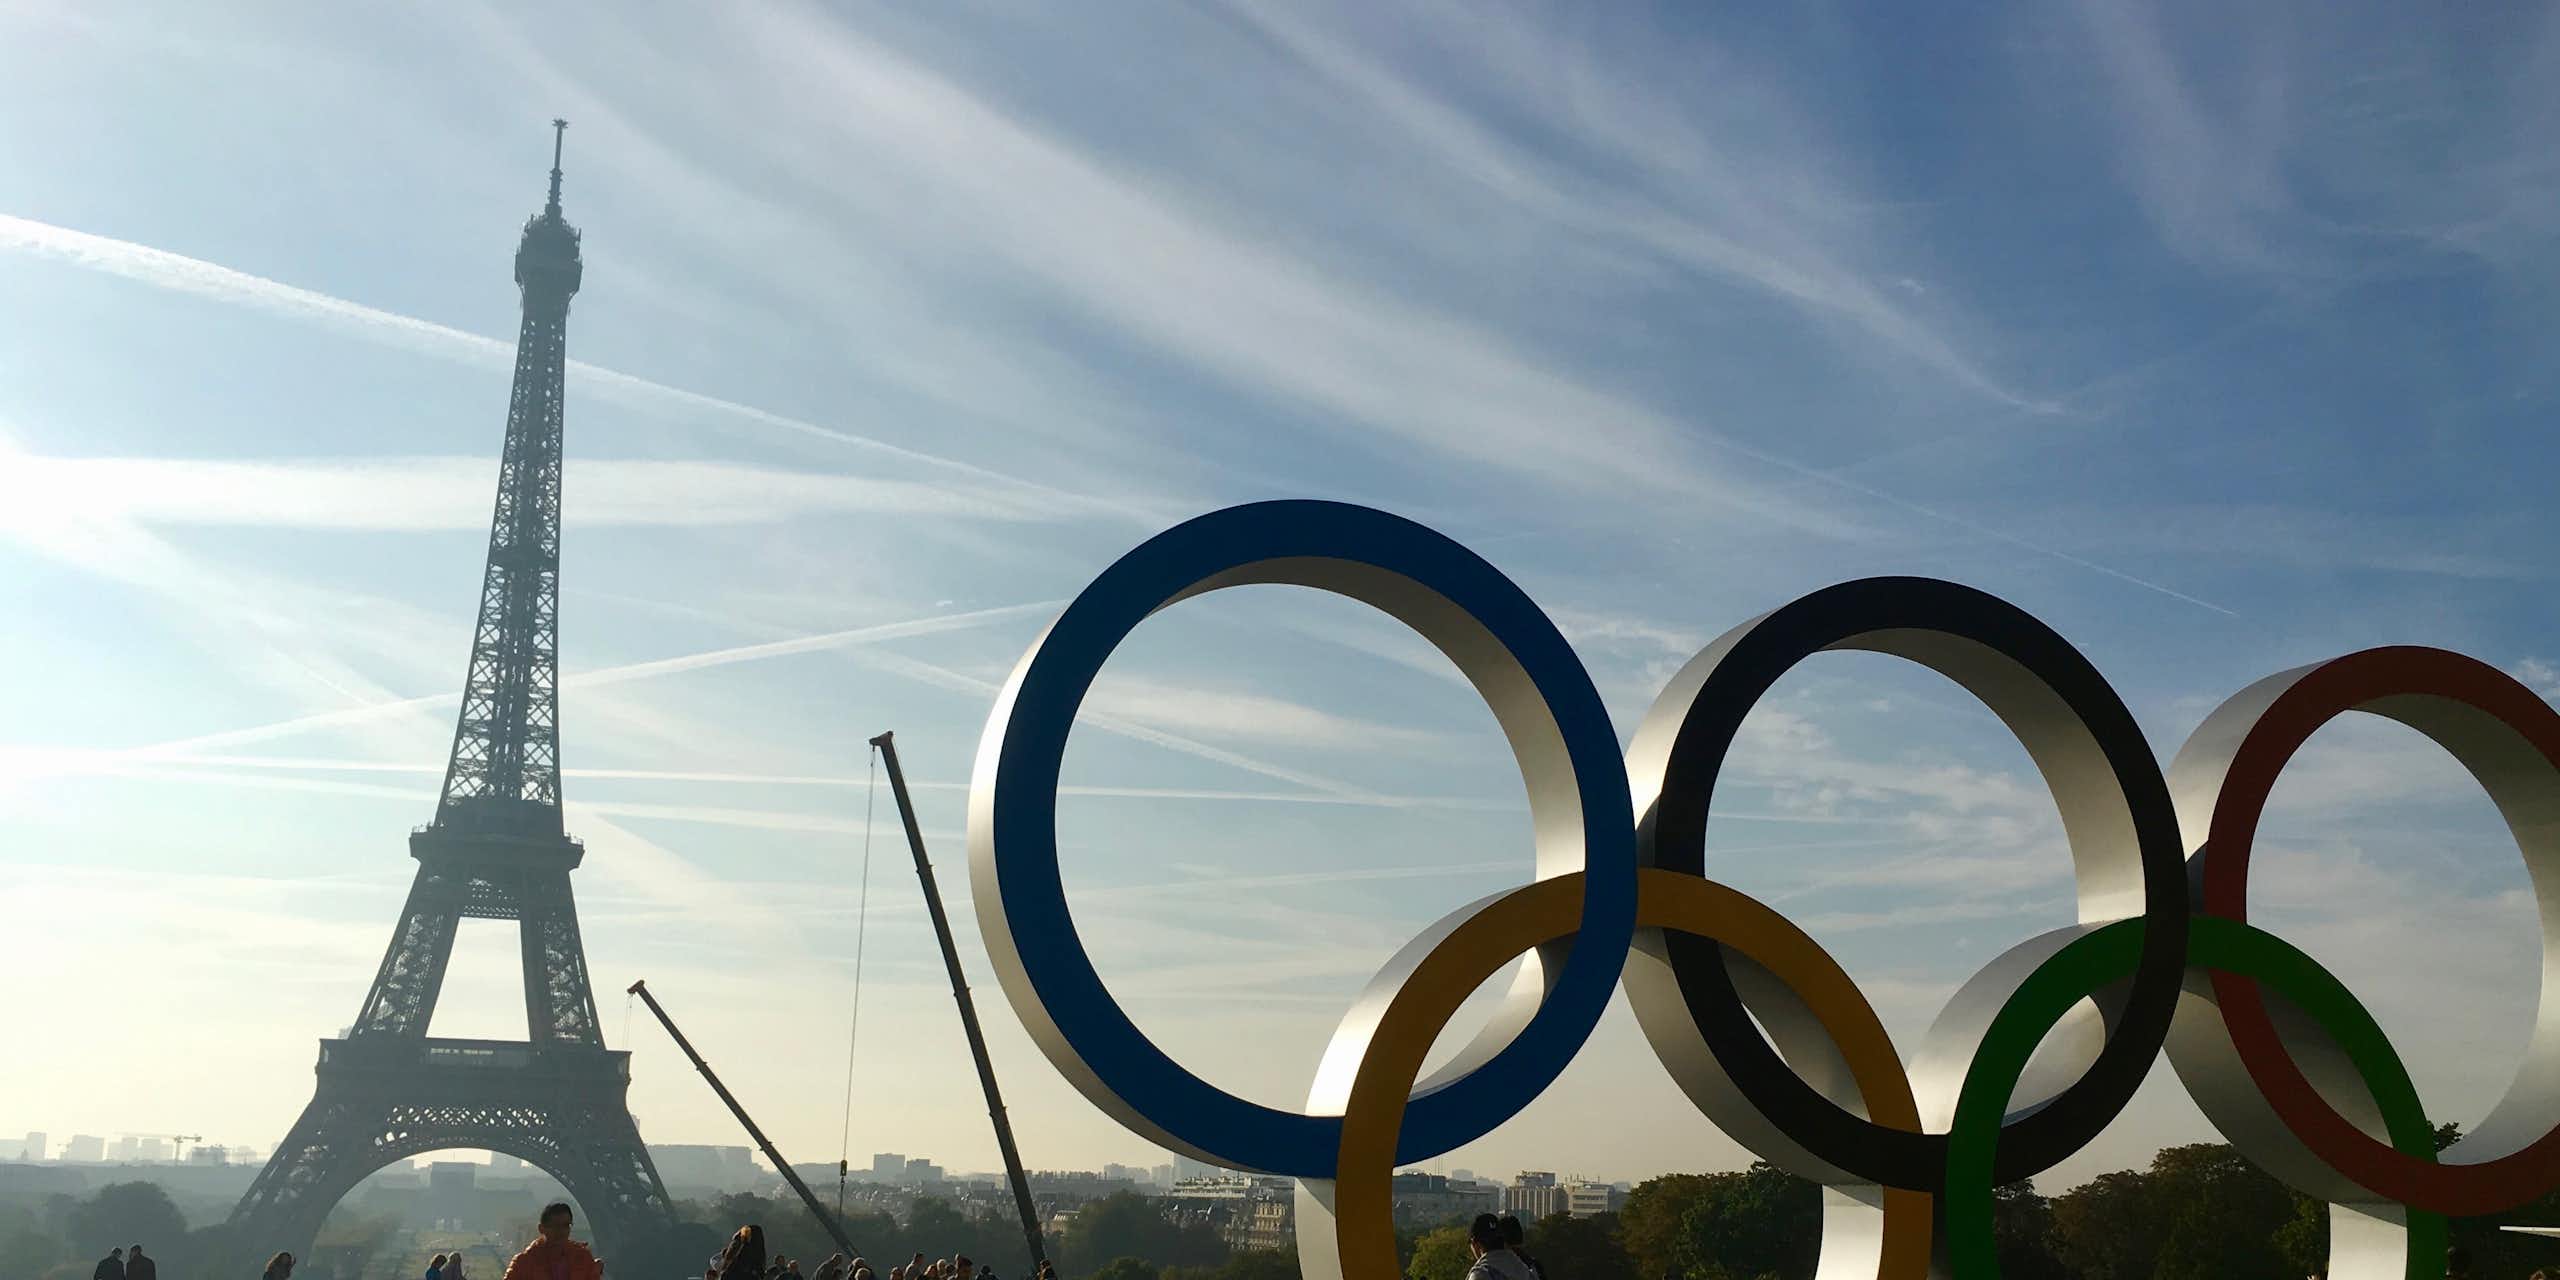 Eiffel Tower and Olympic rings.